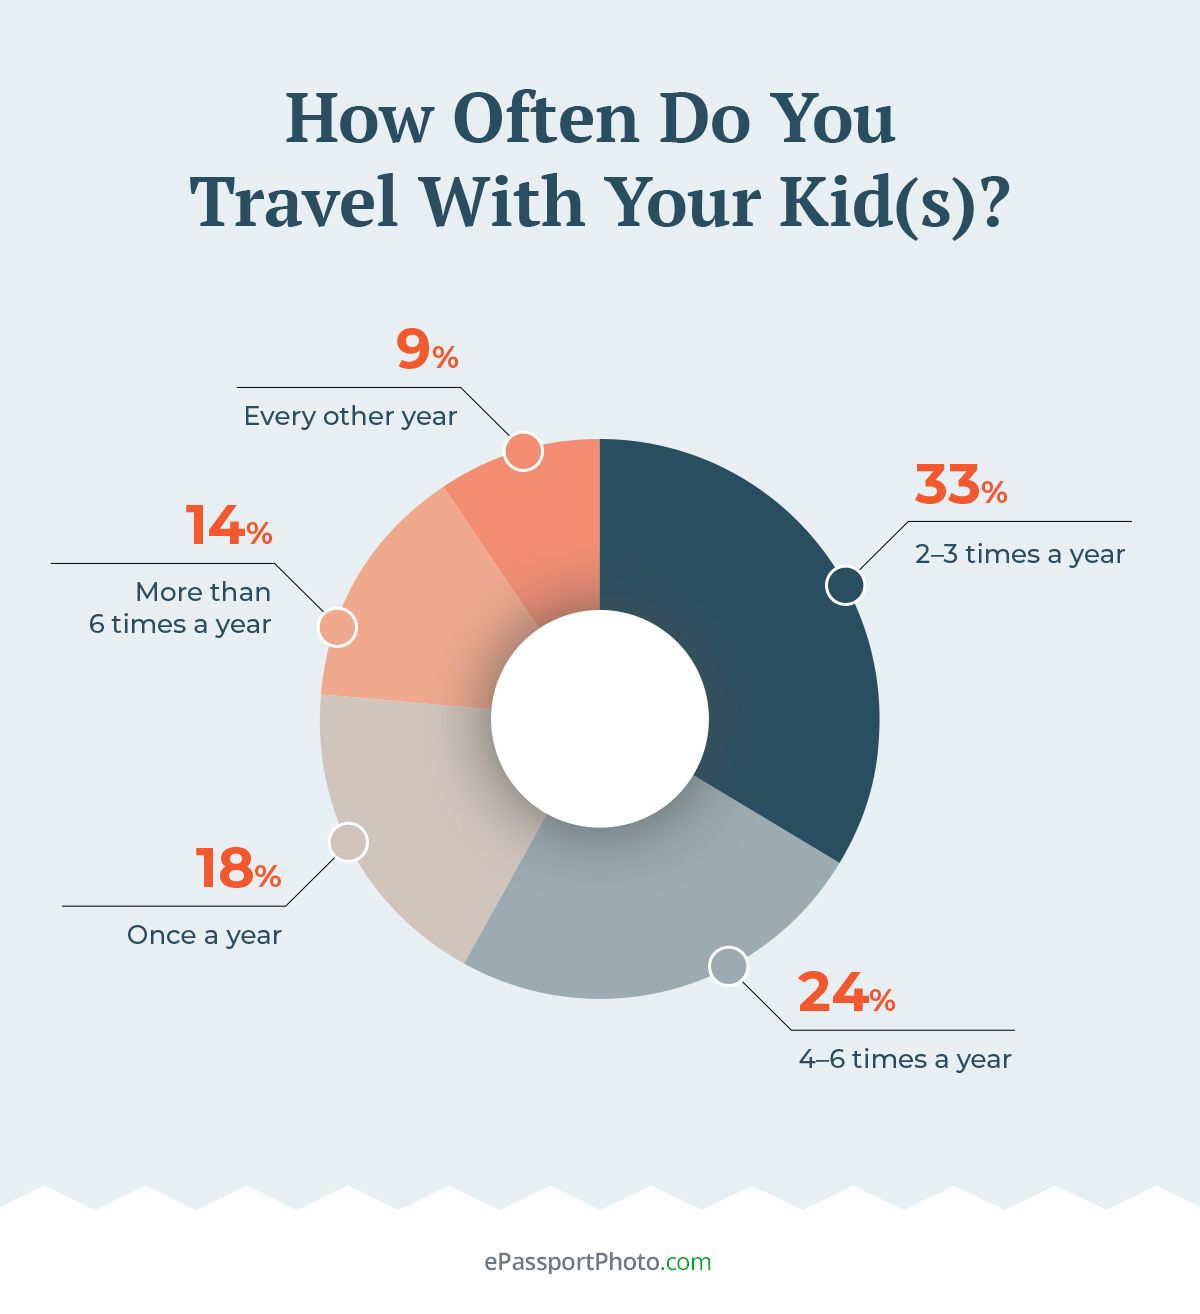 most parents (57%) travel with their children between two and six times a year